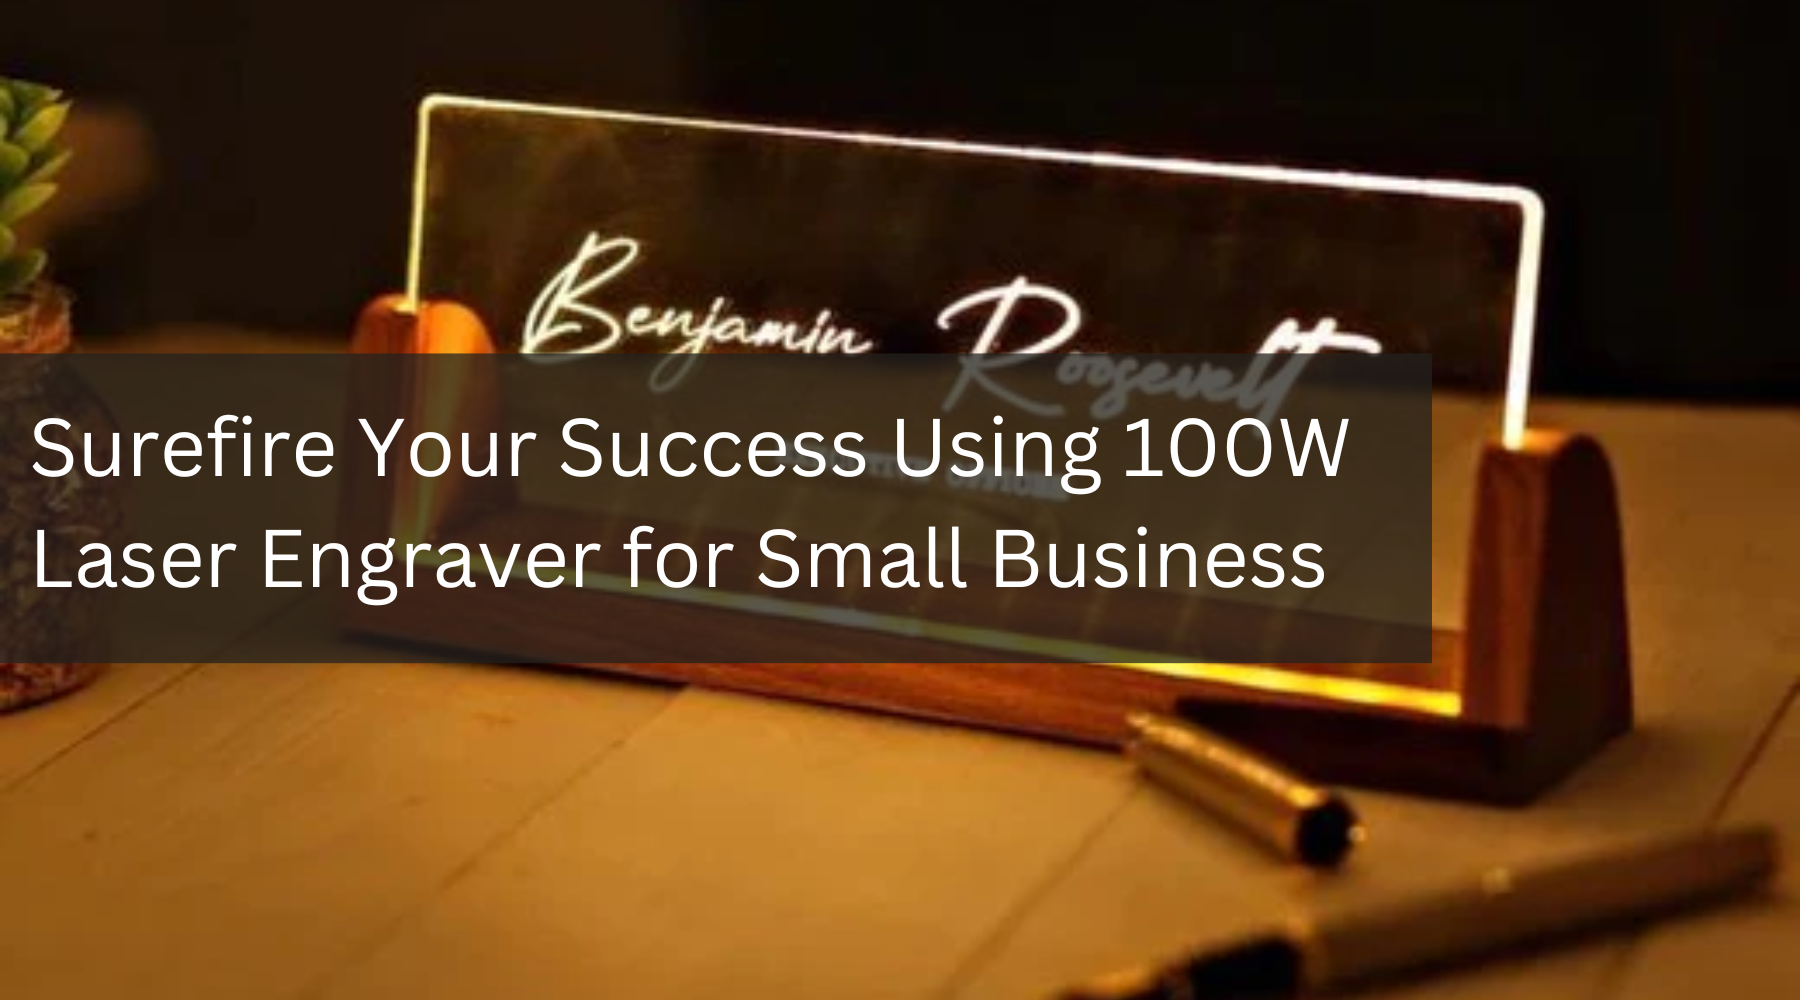 Surefire Your Success Using 100W Laser Engraver for Small Business